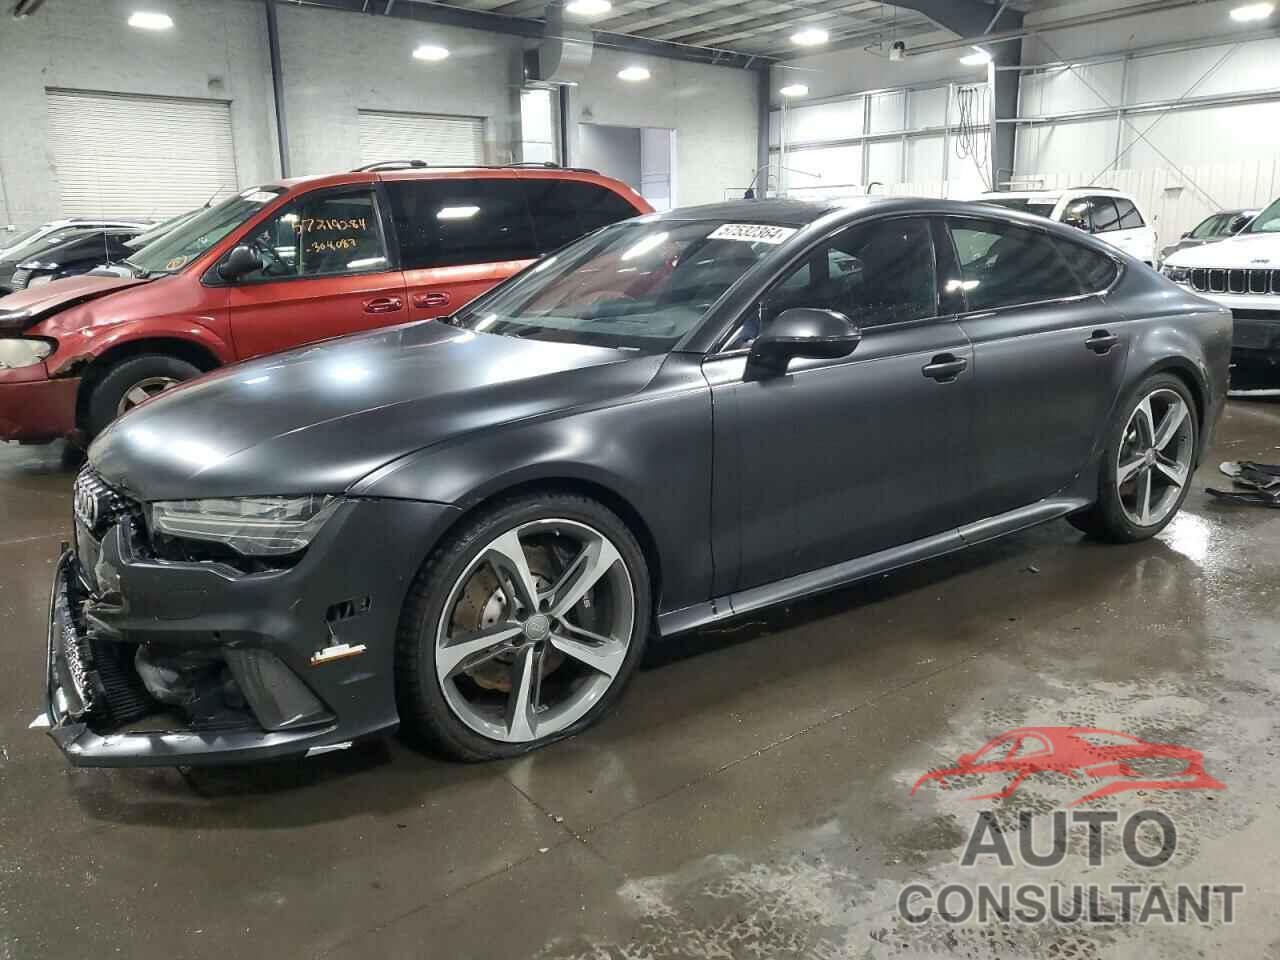 AUDI S7/RS7 2016 - WUAW2AFC9GN900181